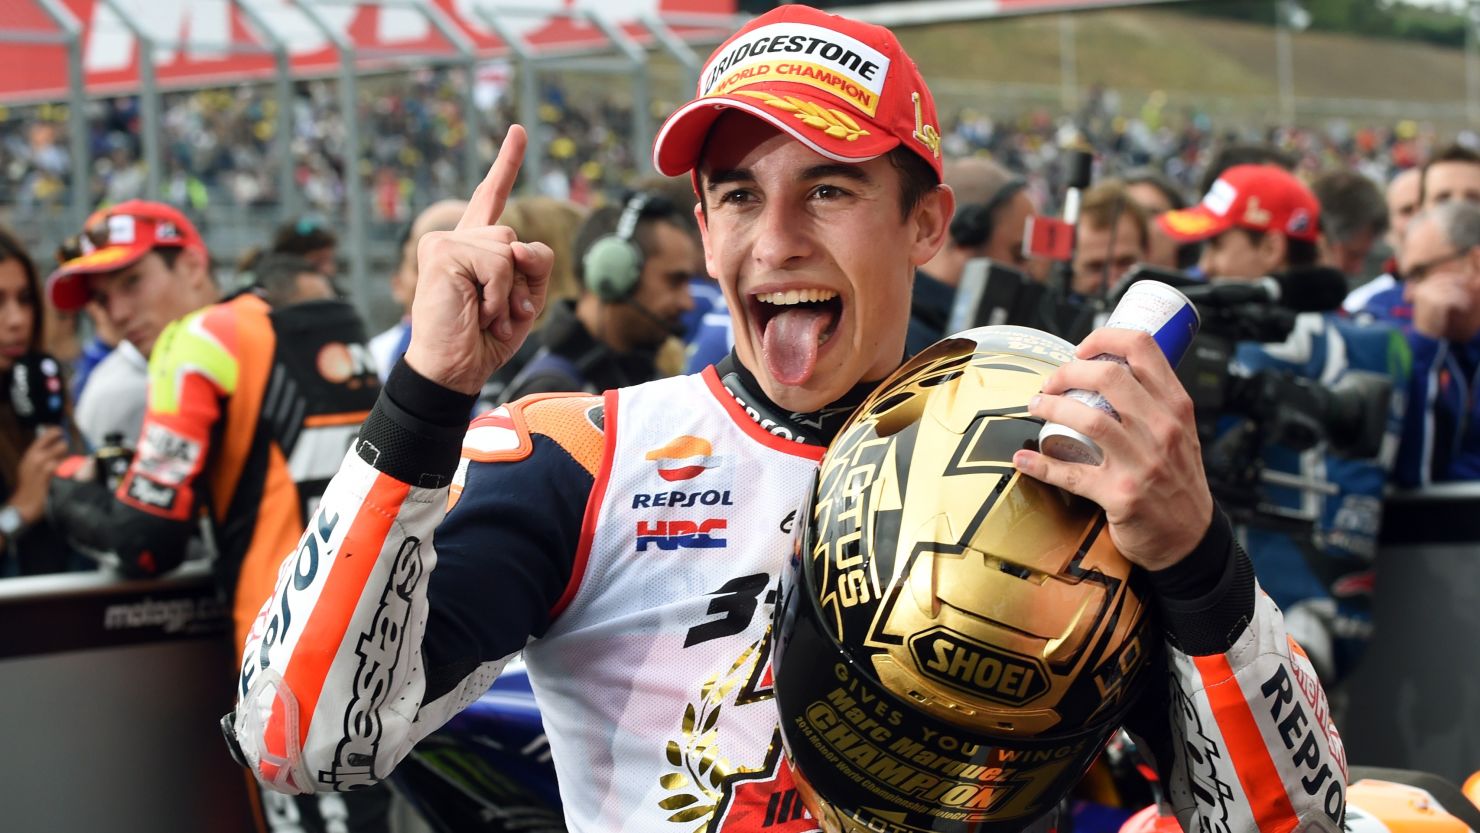 Pressure? What pressure? Marc Marquez storms to a second straight MotoGP crown